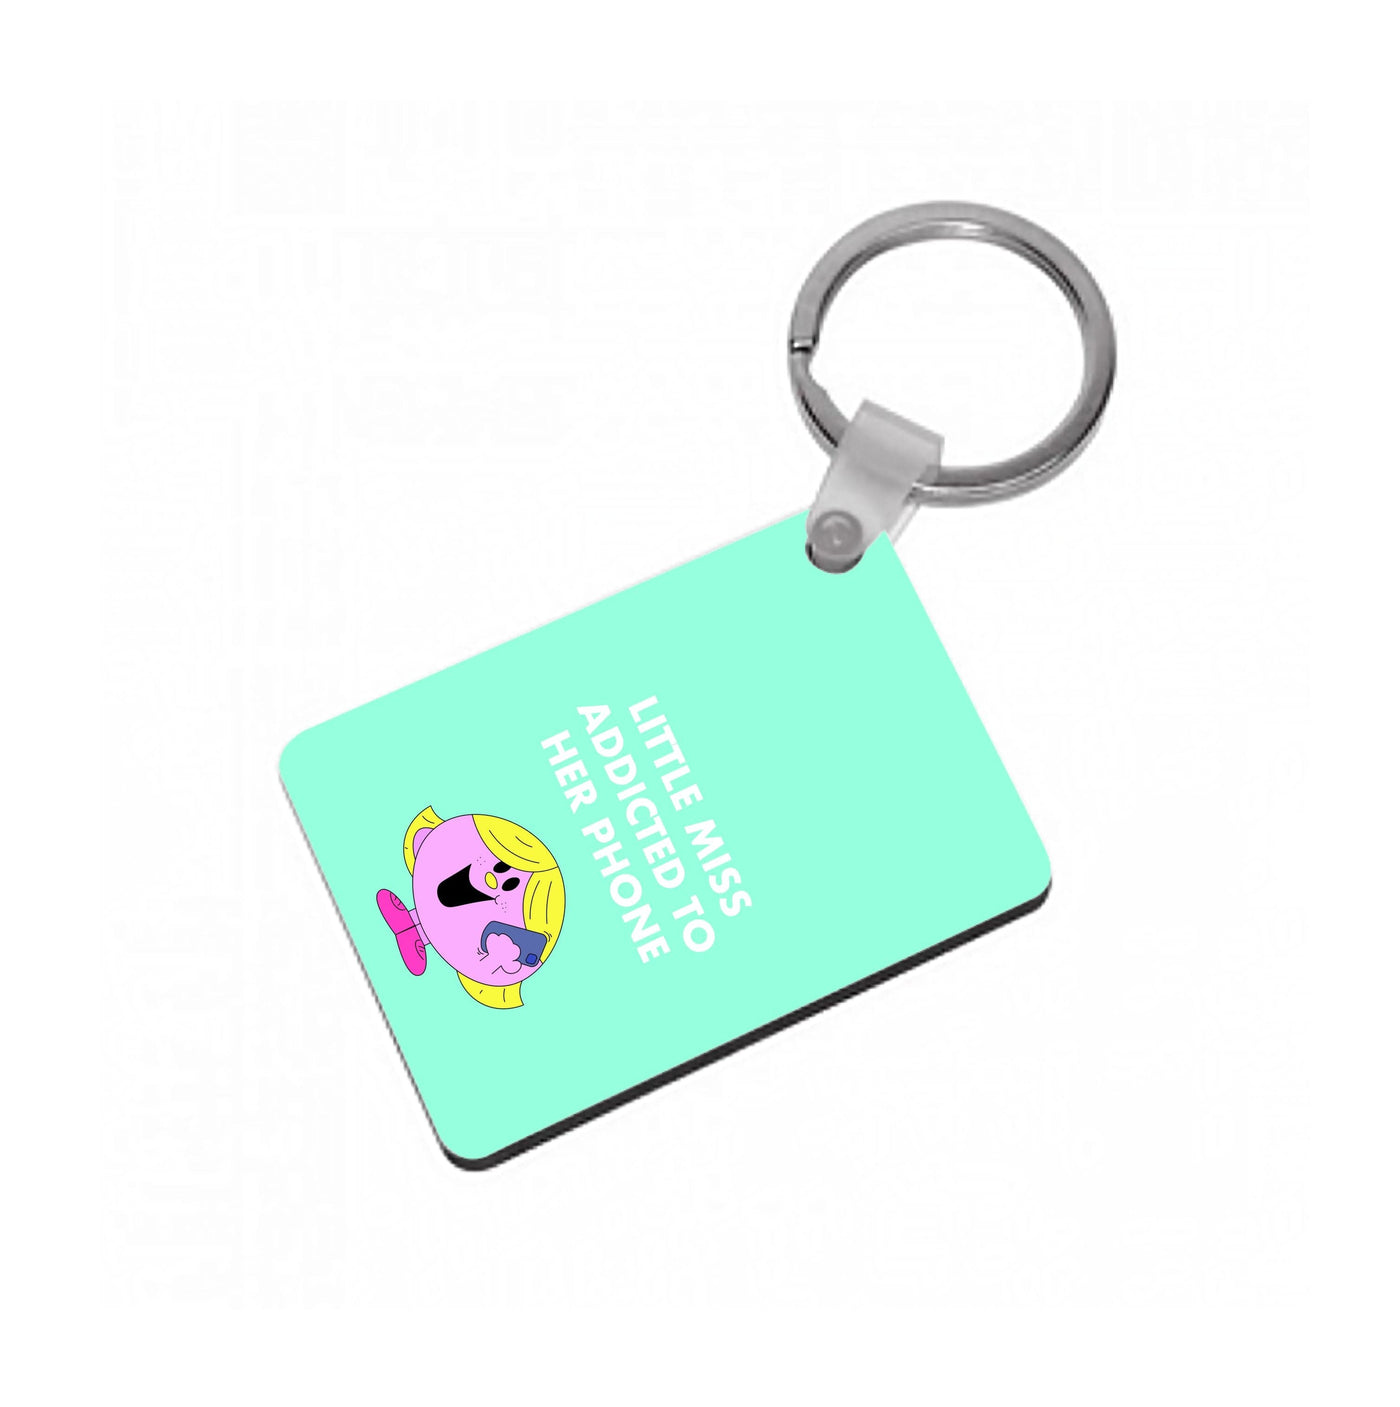 Little Miss Addicted To Her Phone - Aesthetic Quote Keyring